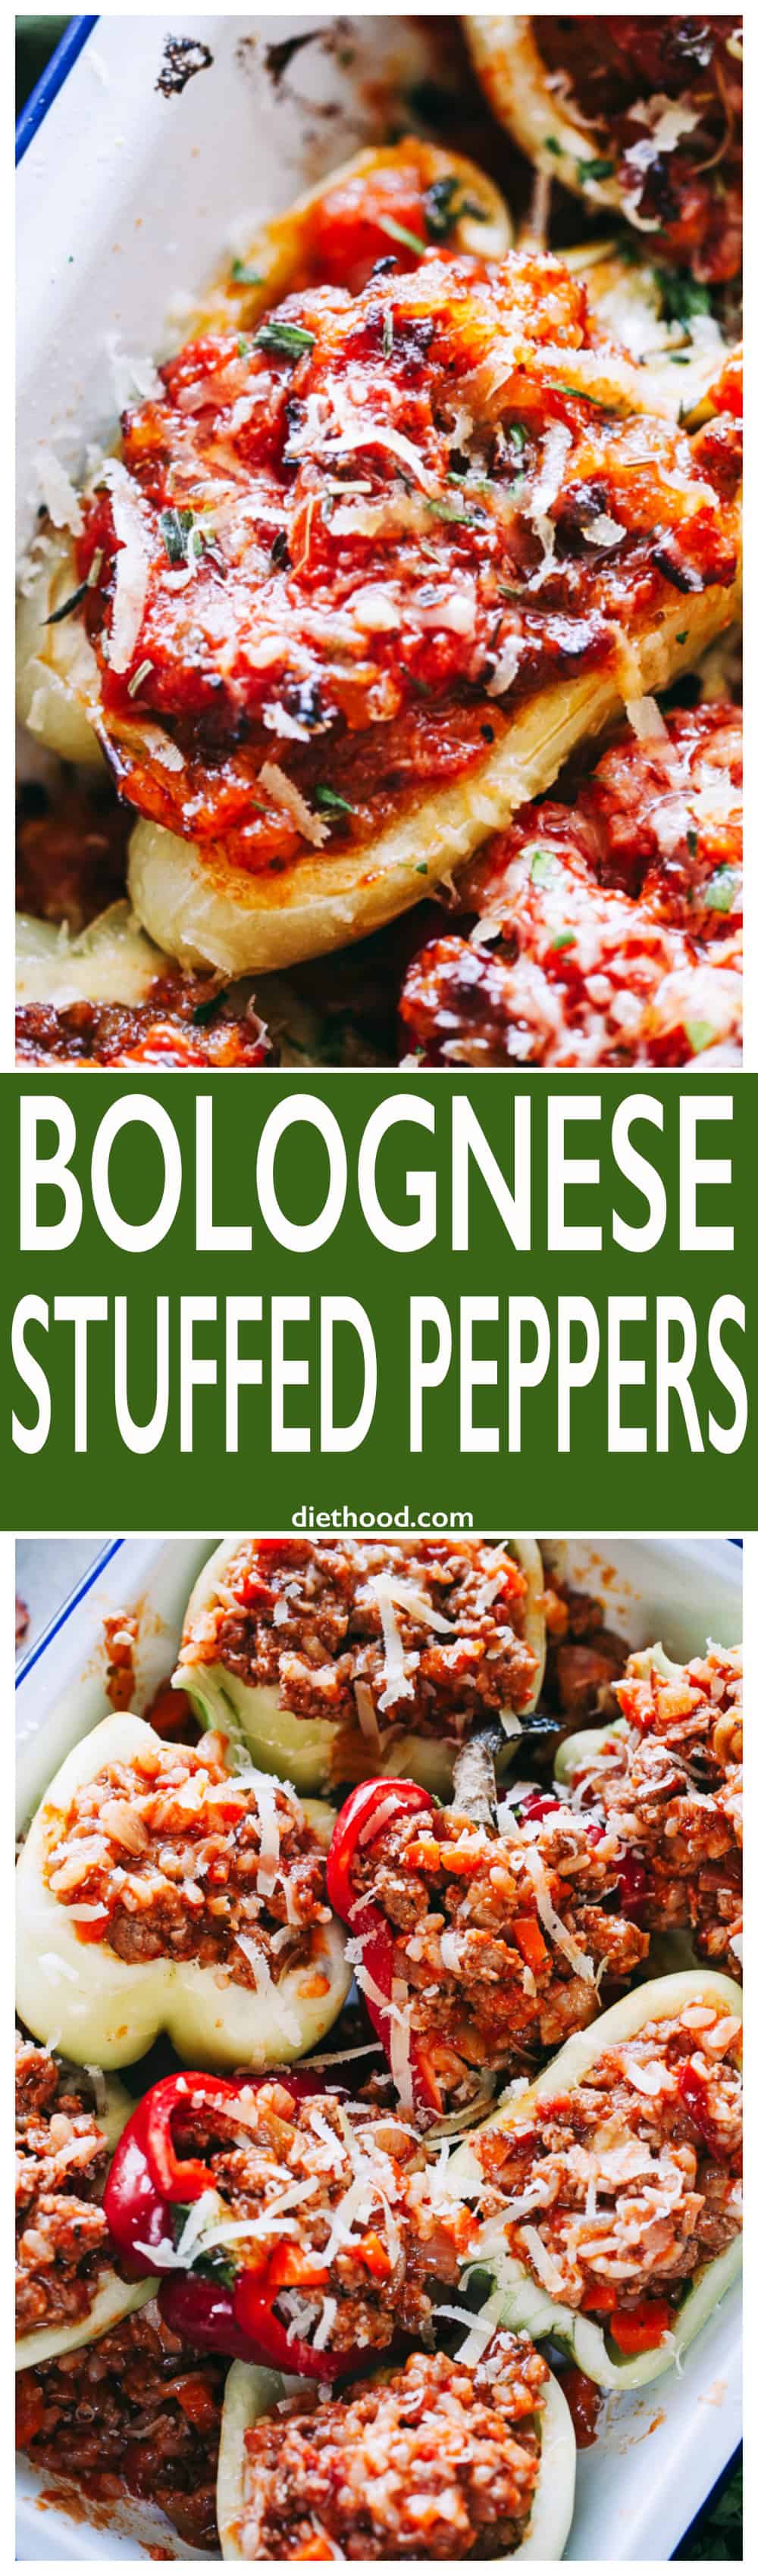 Bolognese Stuffed Peppers - Bolognese inspired filling for stuffed peppers prepared with ground meat, pancetta, tomato sauce, and seasonings.